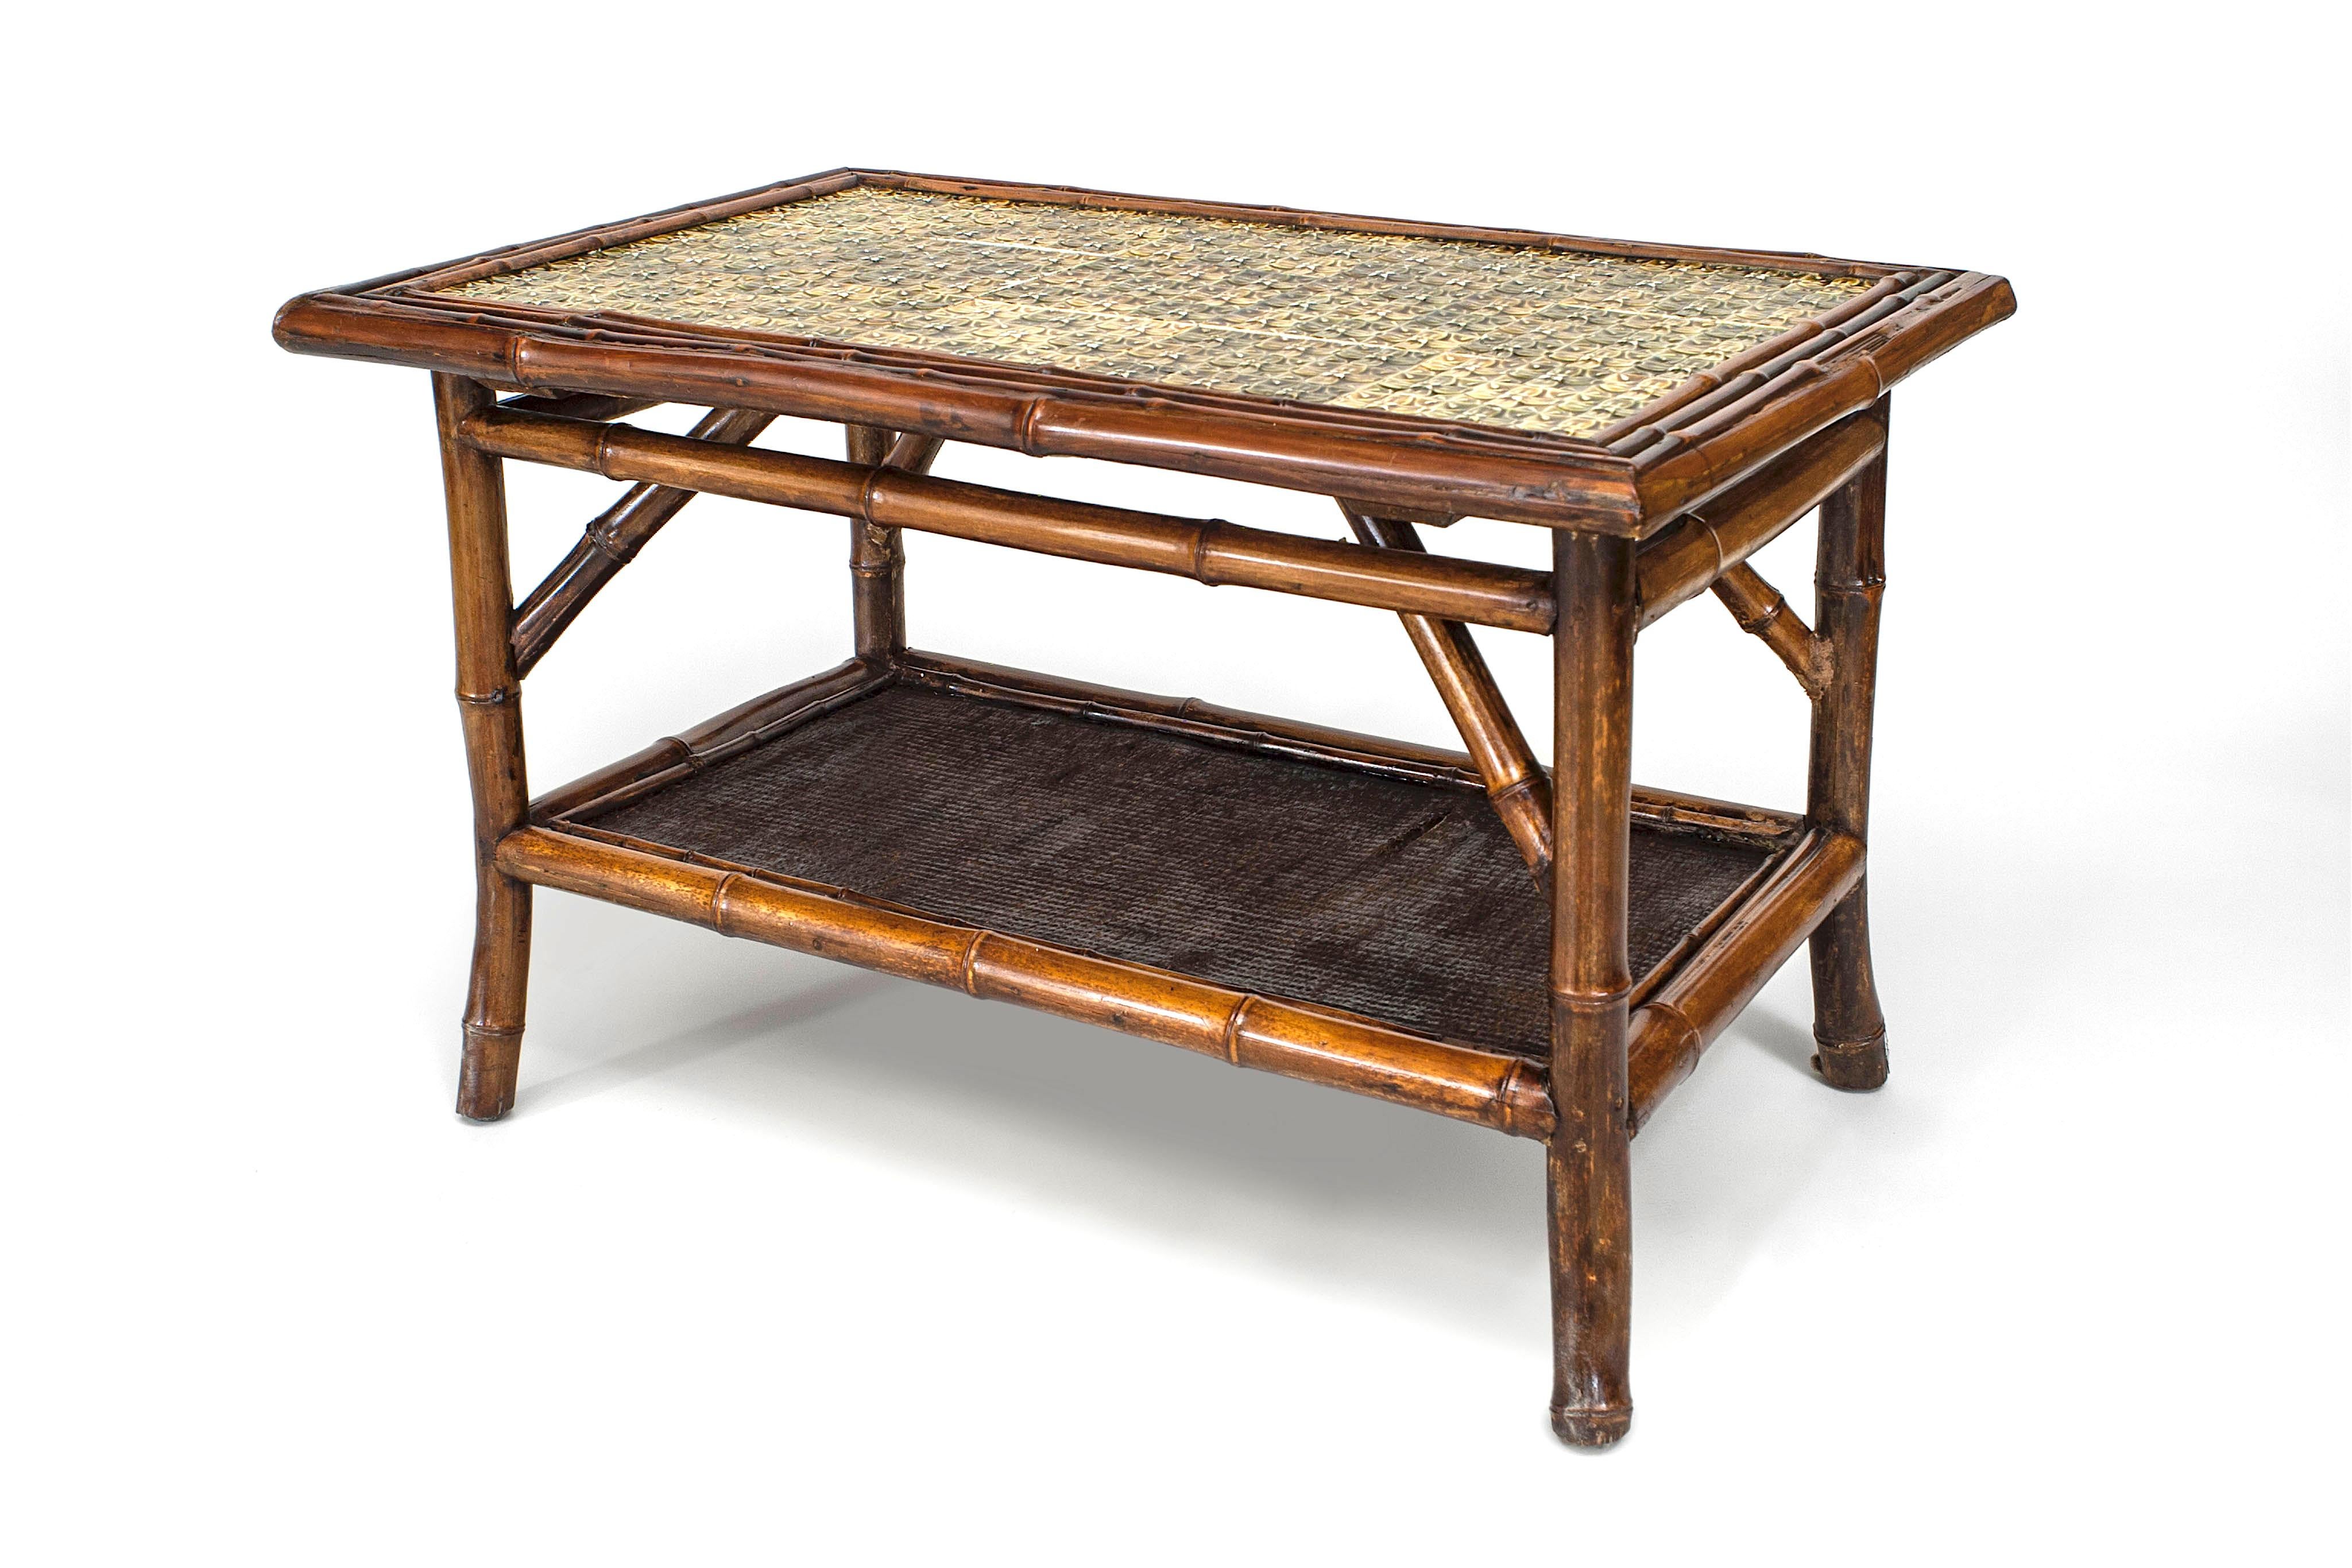 English Bamboo (19th Century) rectangular coffee table with a green tile top and a rush covered lower shelf.
